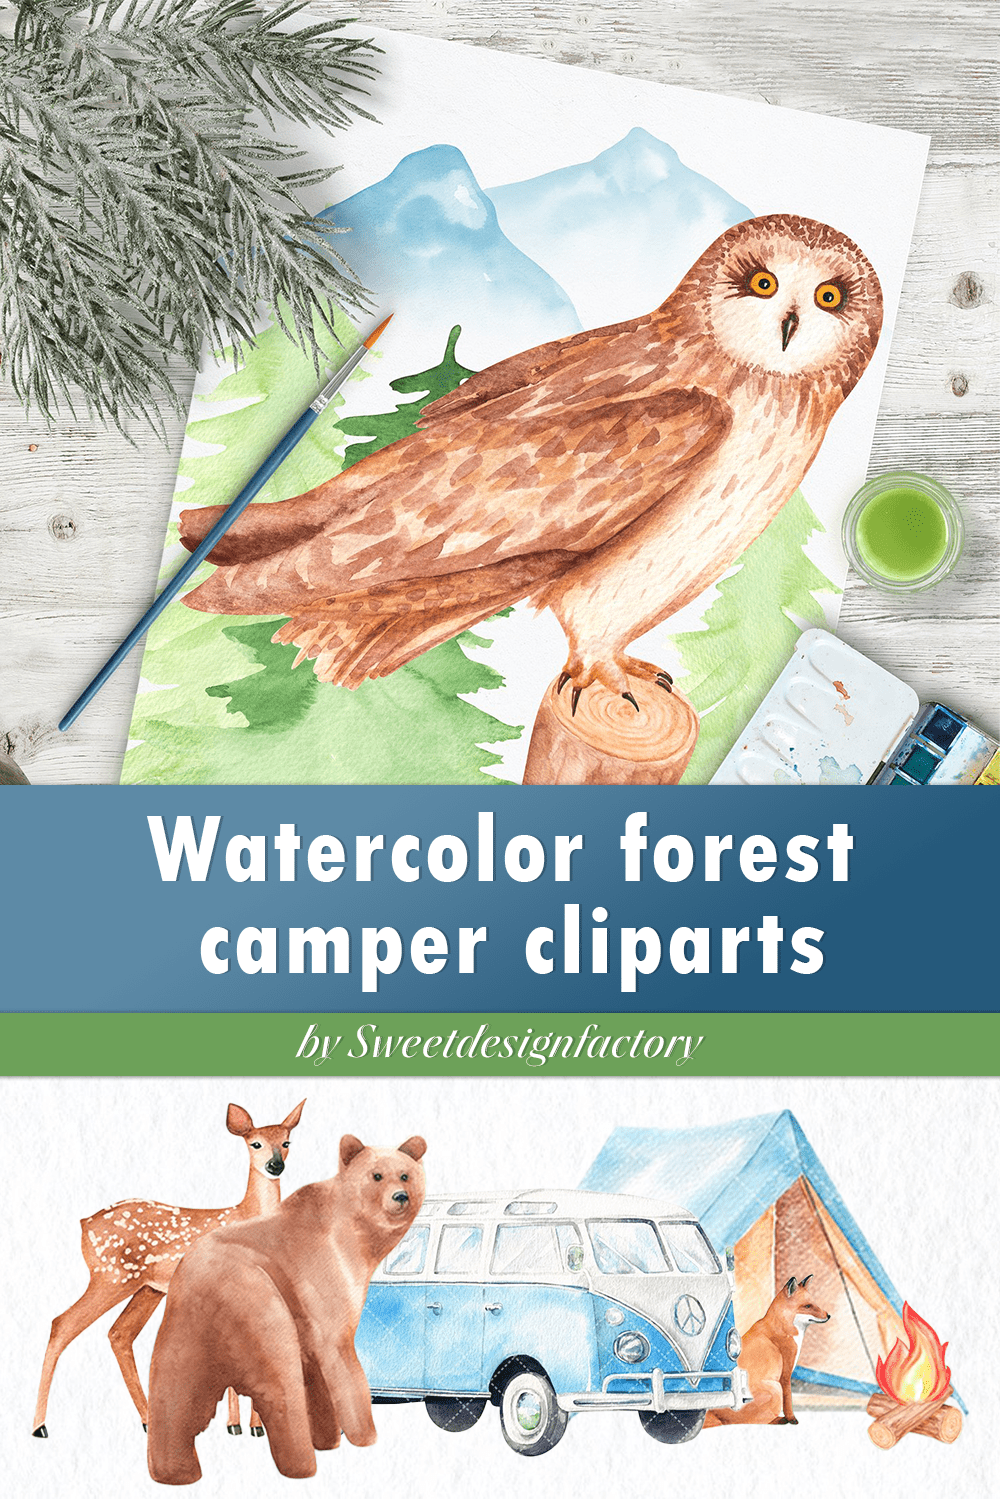 watercolor forest camper cliparts pinterest